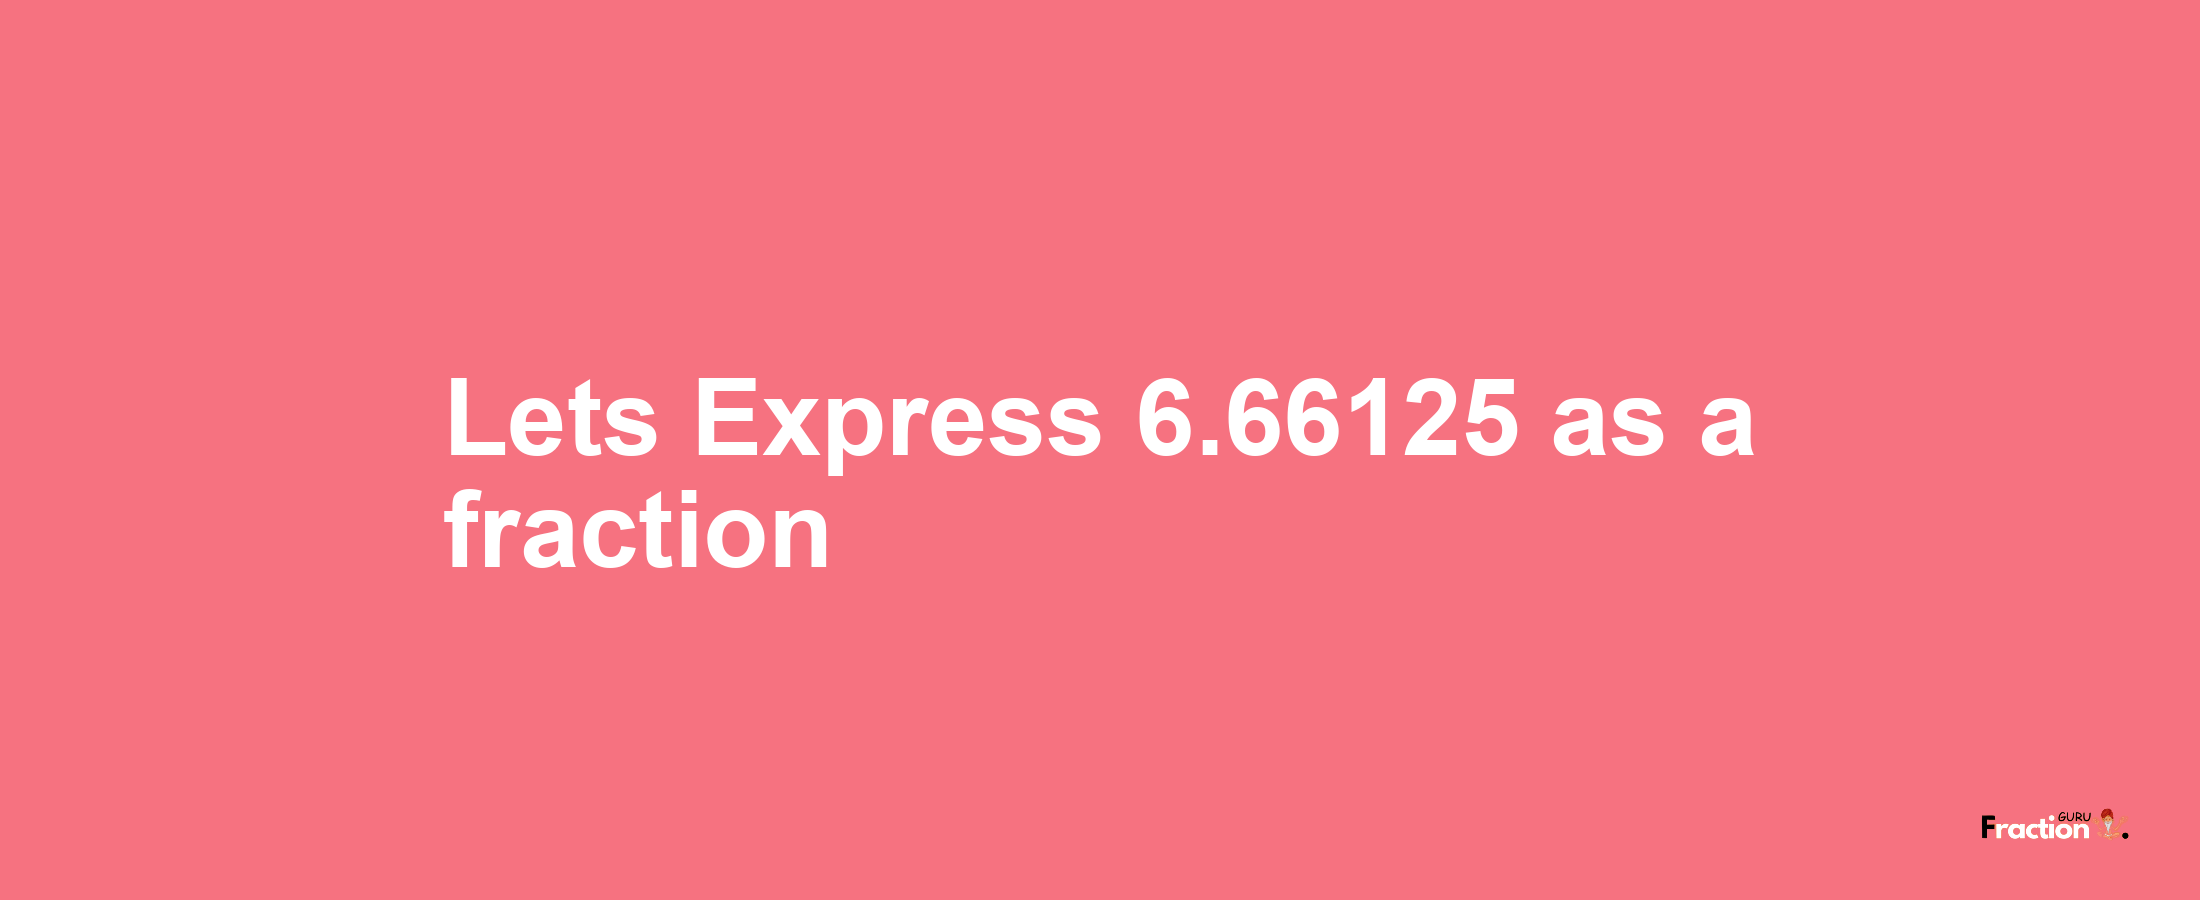 Lets Express 6.66125 as afraction